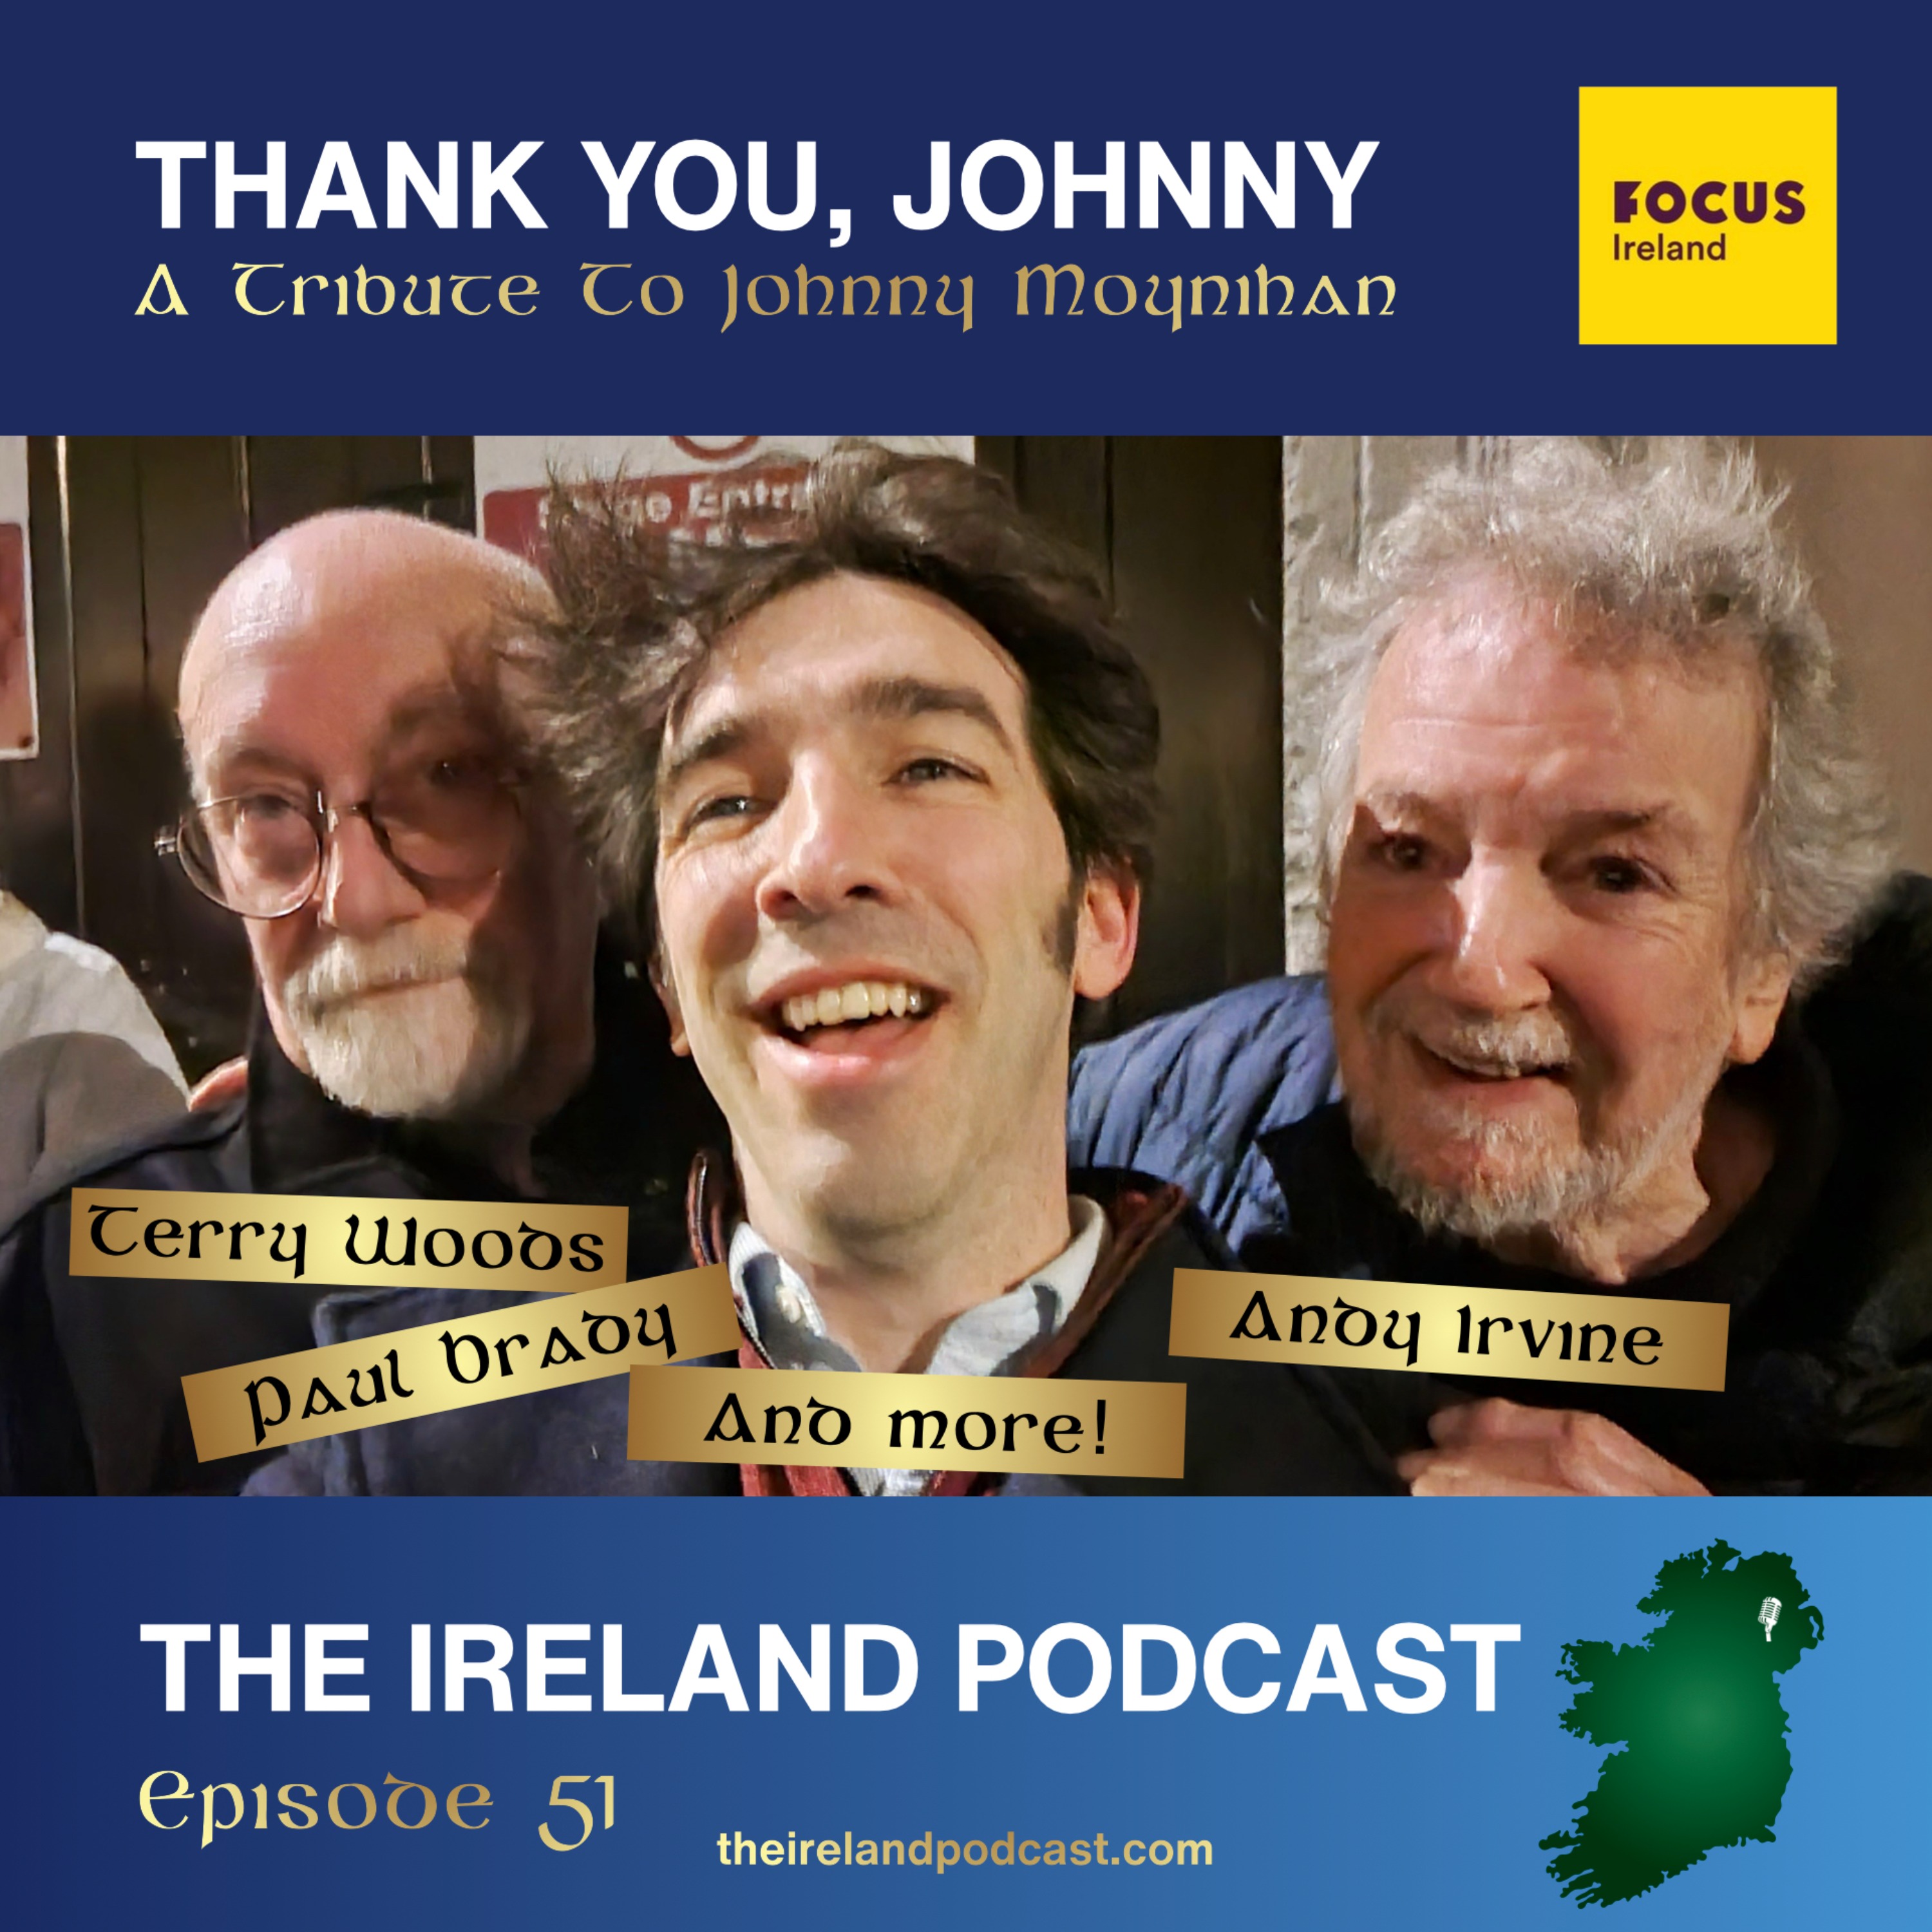 51. Thank You, Johnny: A Tribute To Johnny Moynihan